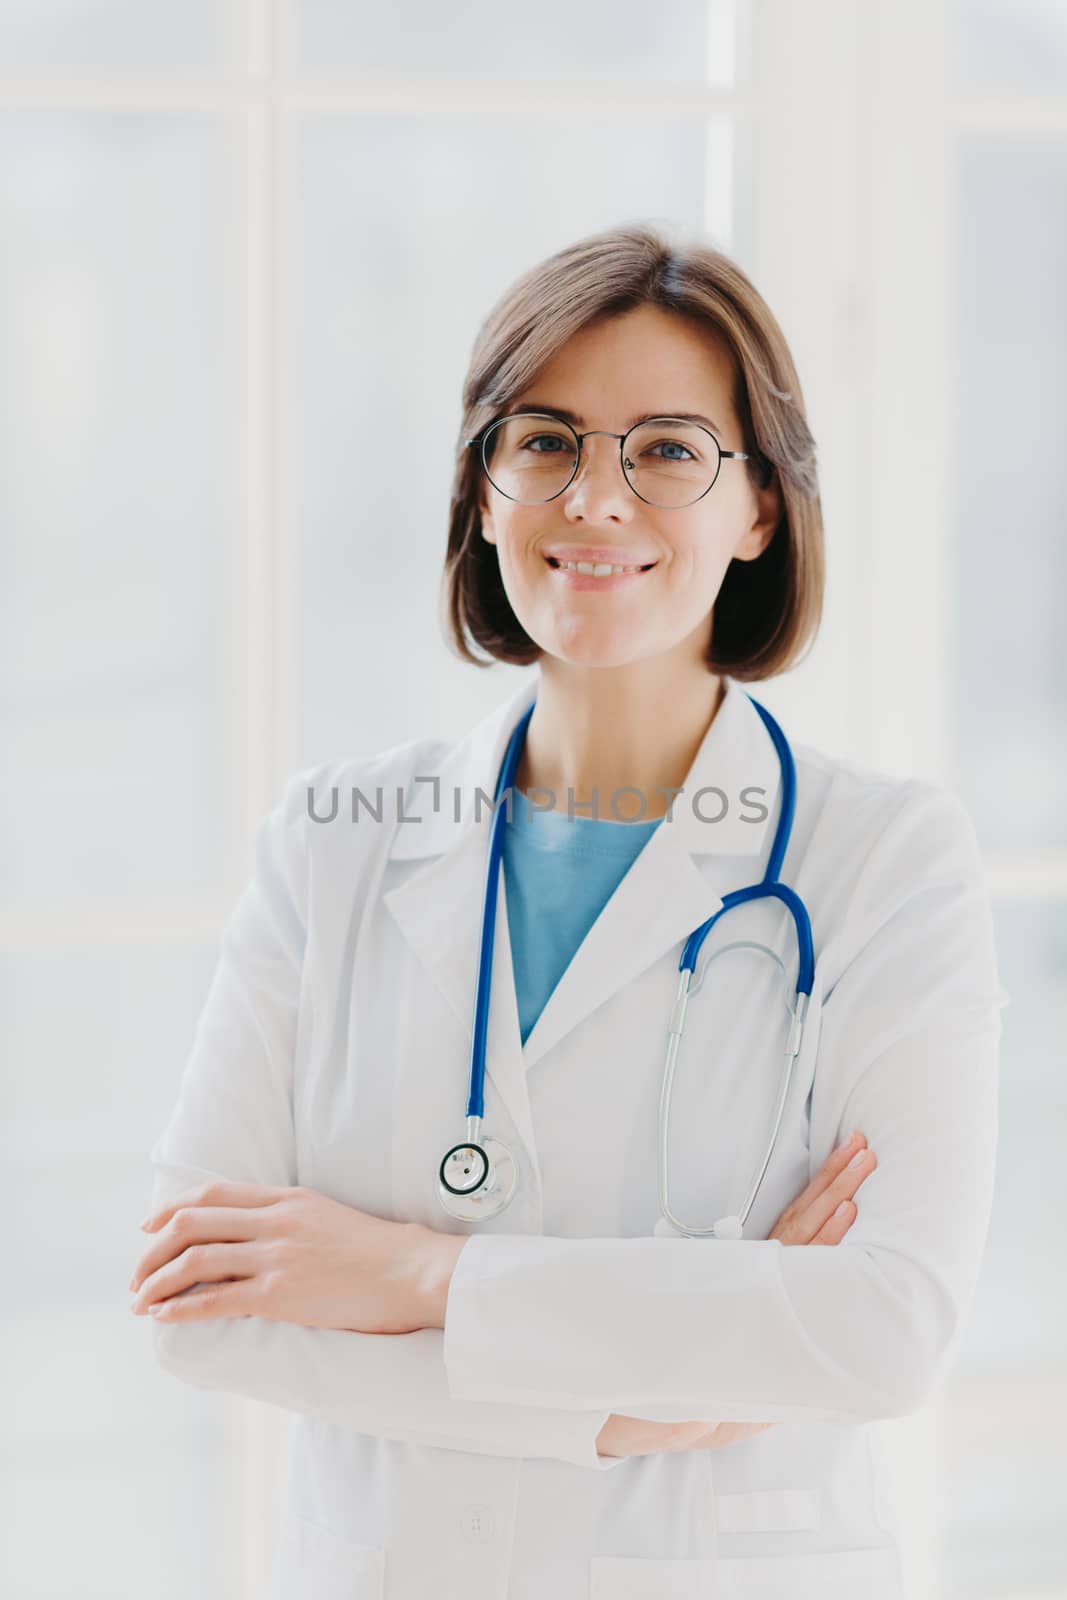 Beautiful cheerful woman doctor wears white gown, glasses and phonendoscope, keeps hands crossed, looks confidently at camera, has short dark hair, stands against white background, works in clinic